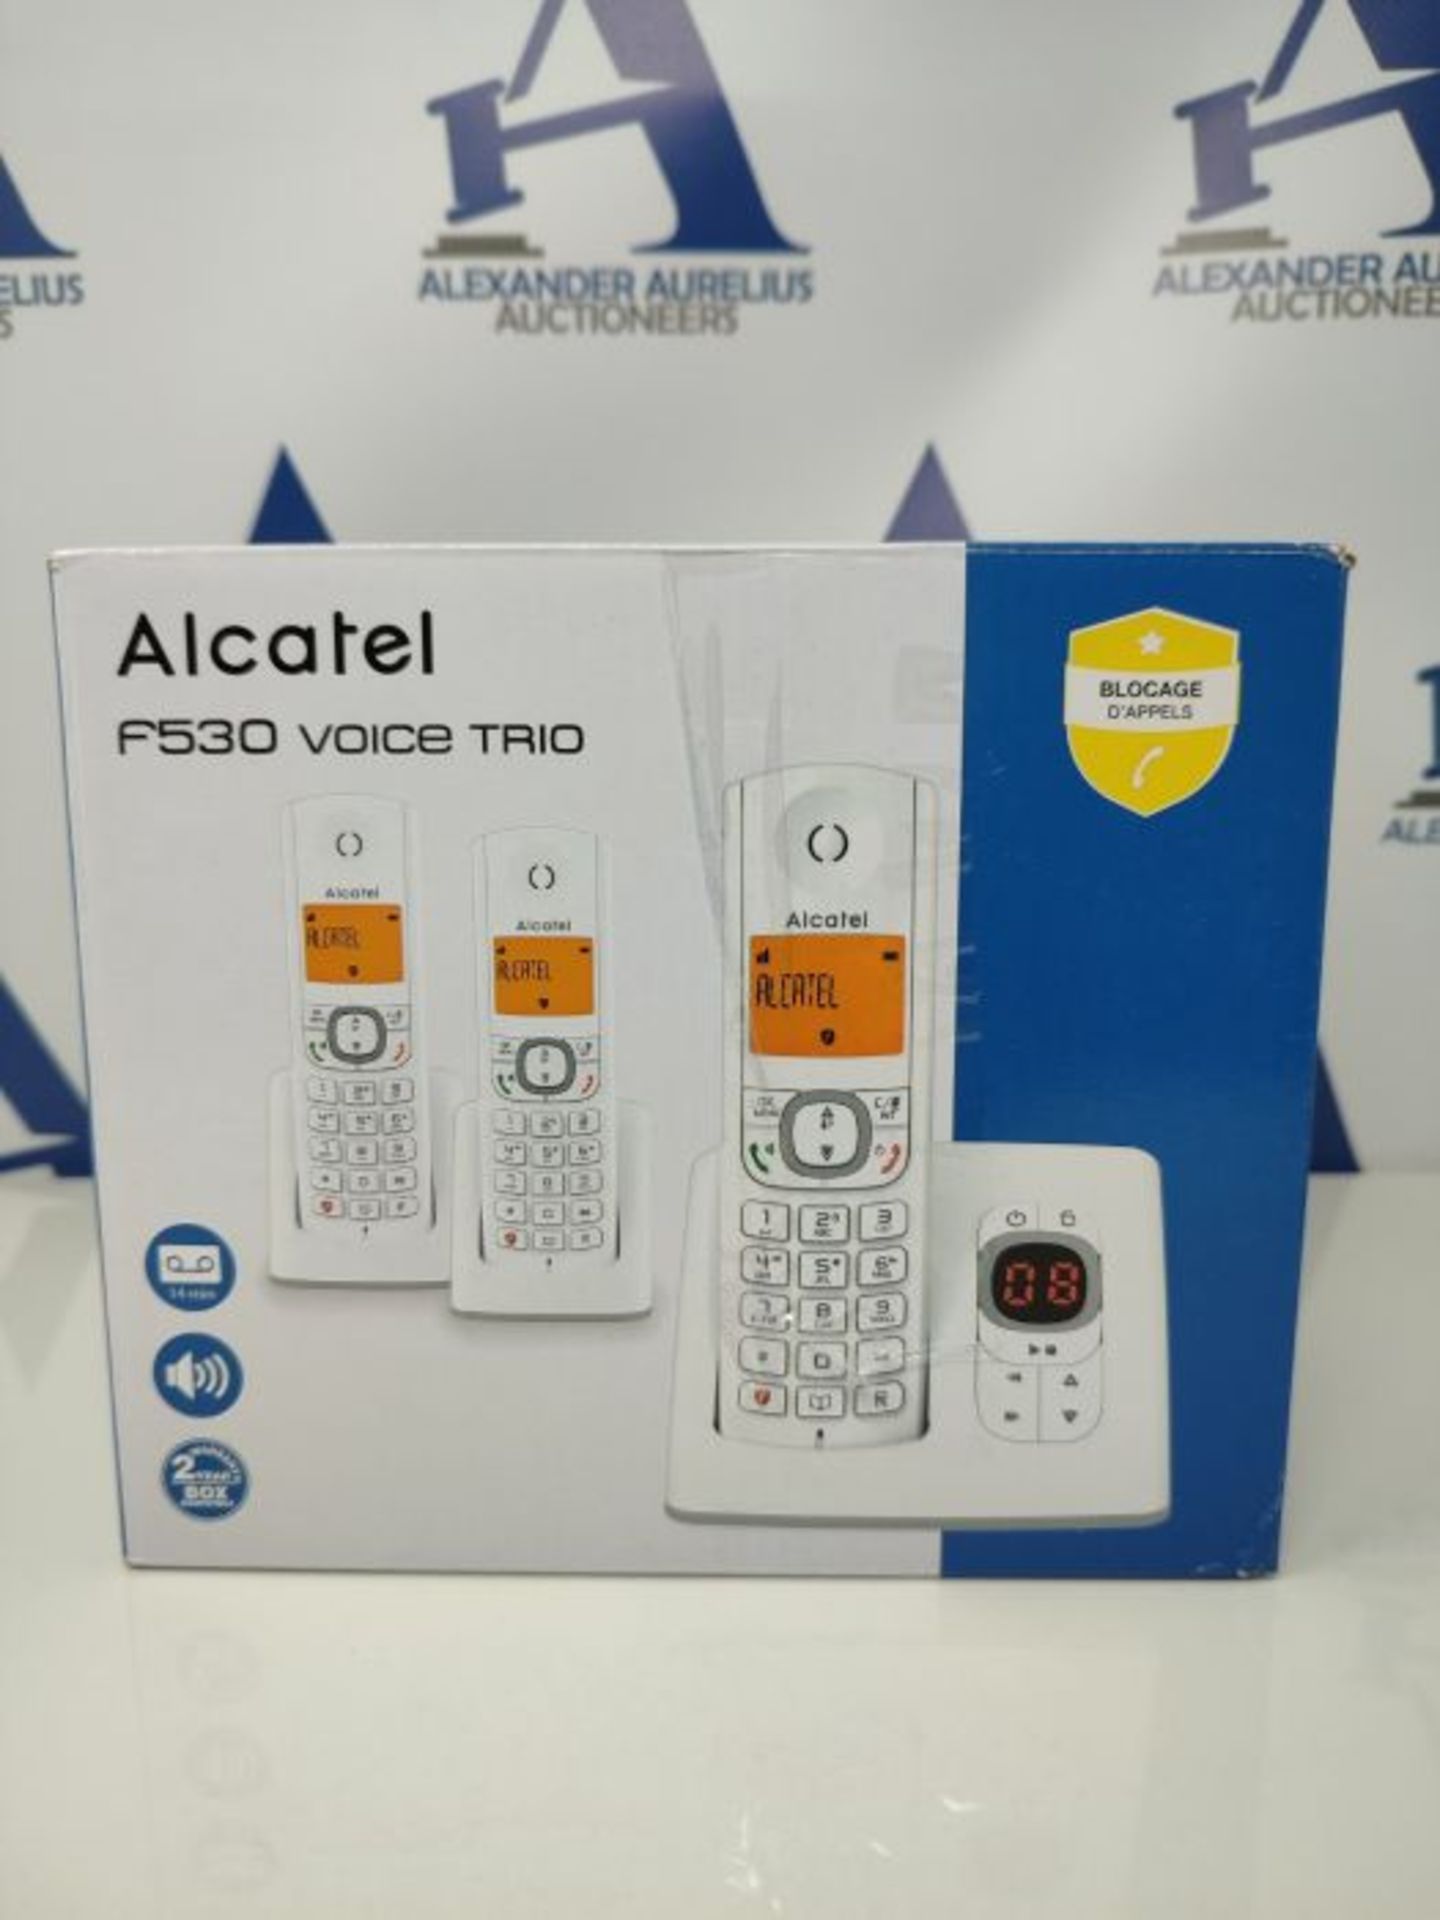 RRP £69.00 Alcatel F530 Voice TRIO Candy-Bar - Image 8 of 9